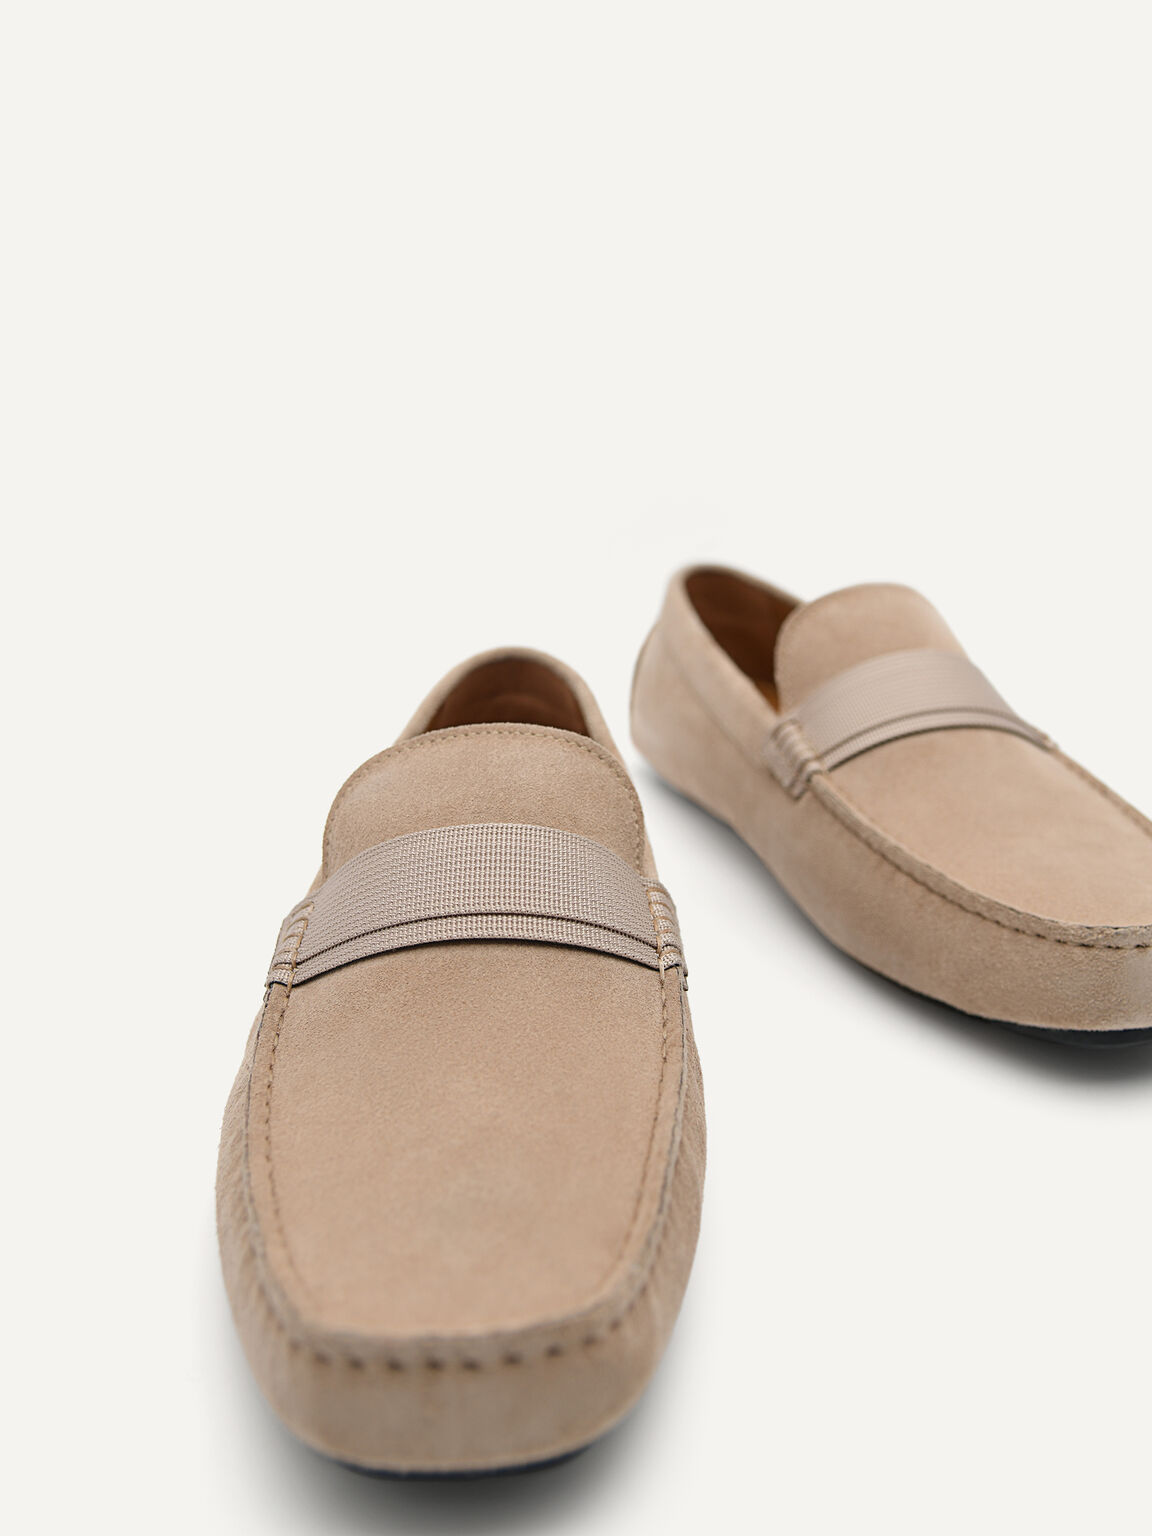 Suede Barcode Driving Moccassins, Sand